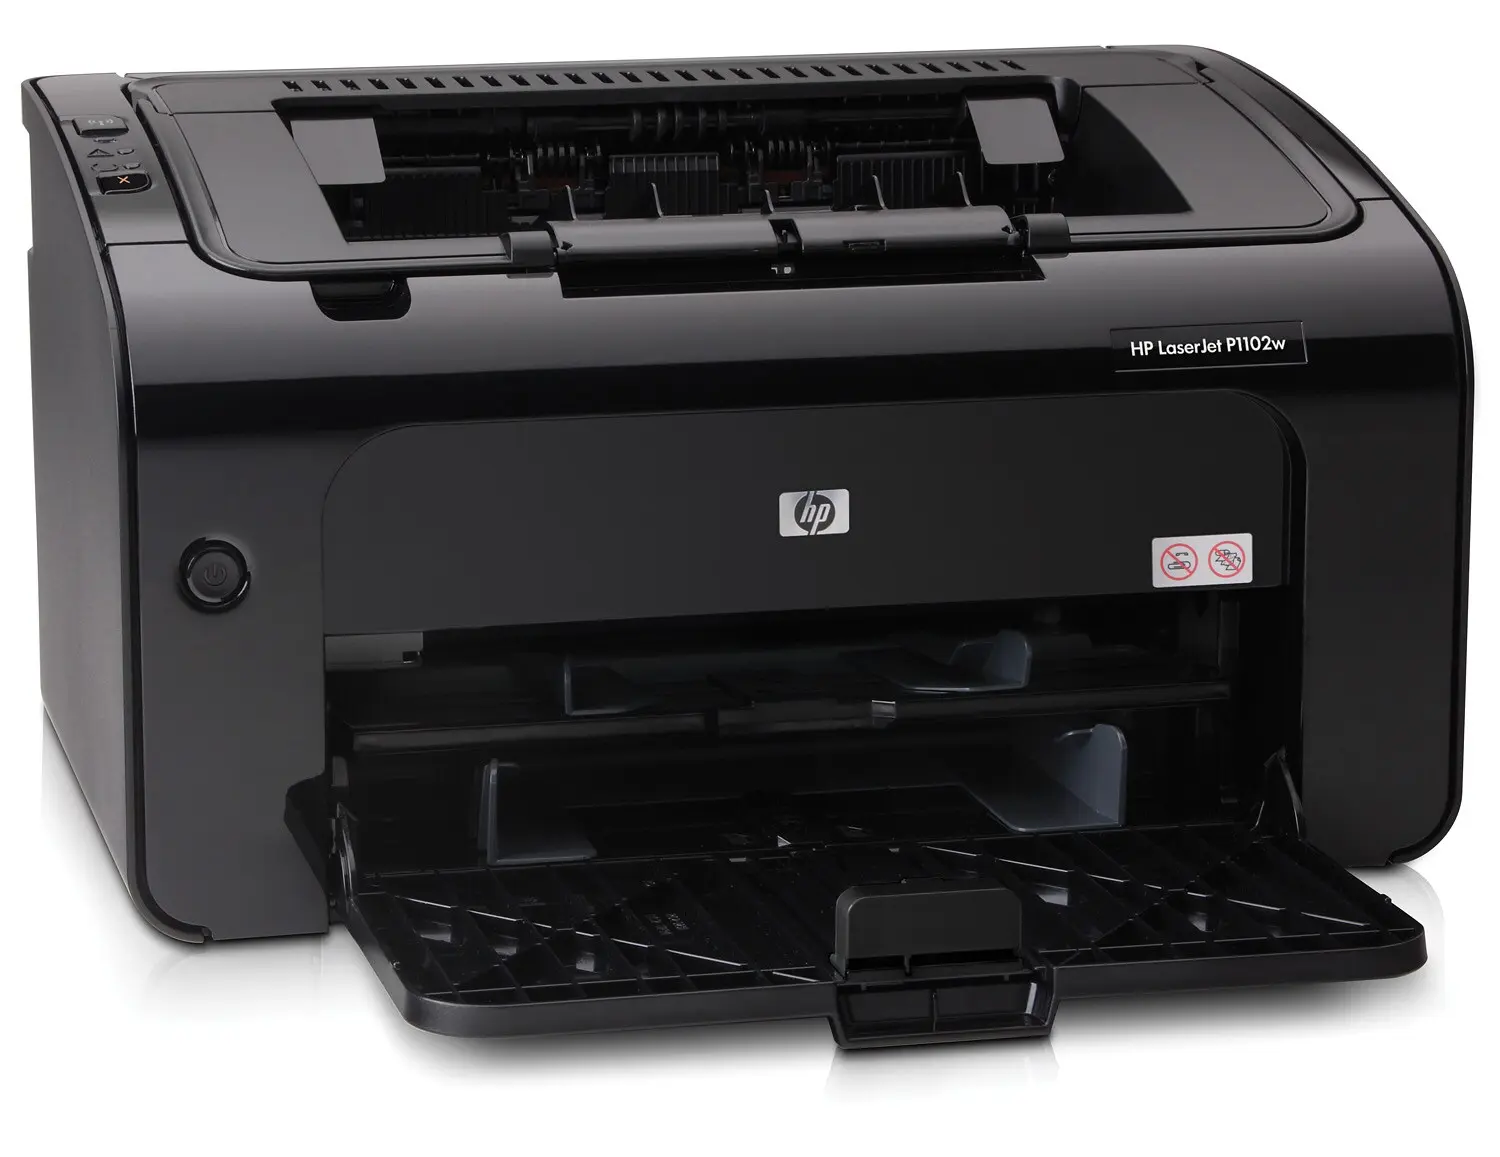 hewlett packard laserjet p1102w - What is the difference between HP LaserJet p1102 and P1102w